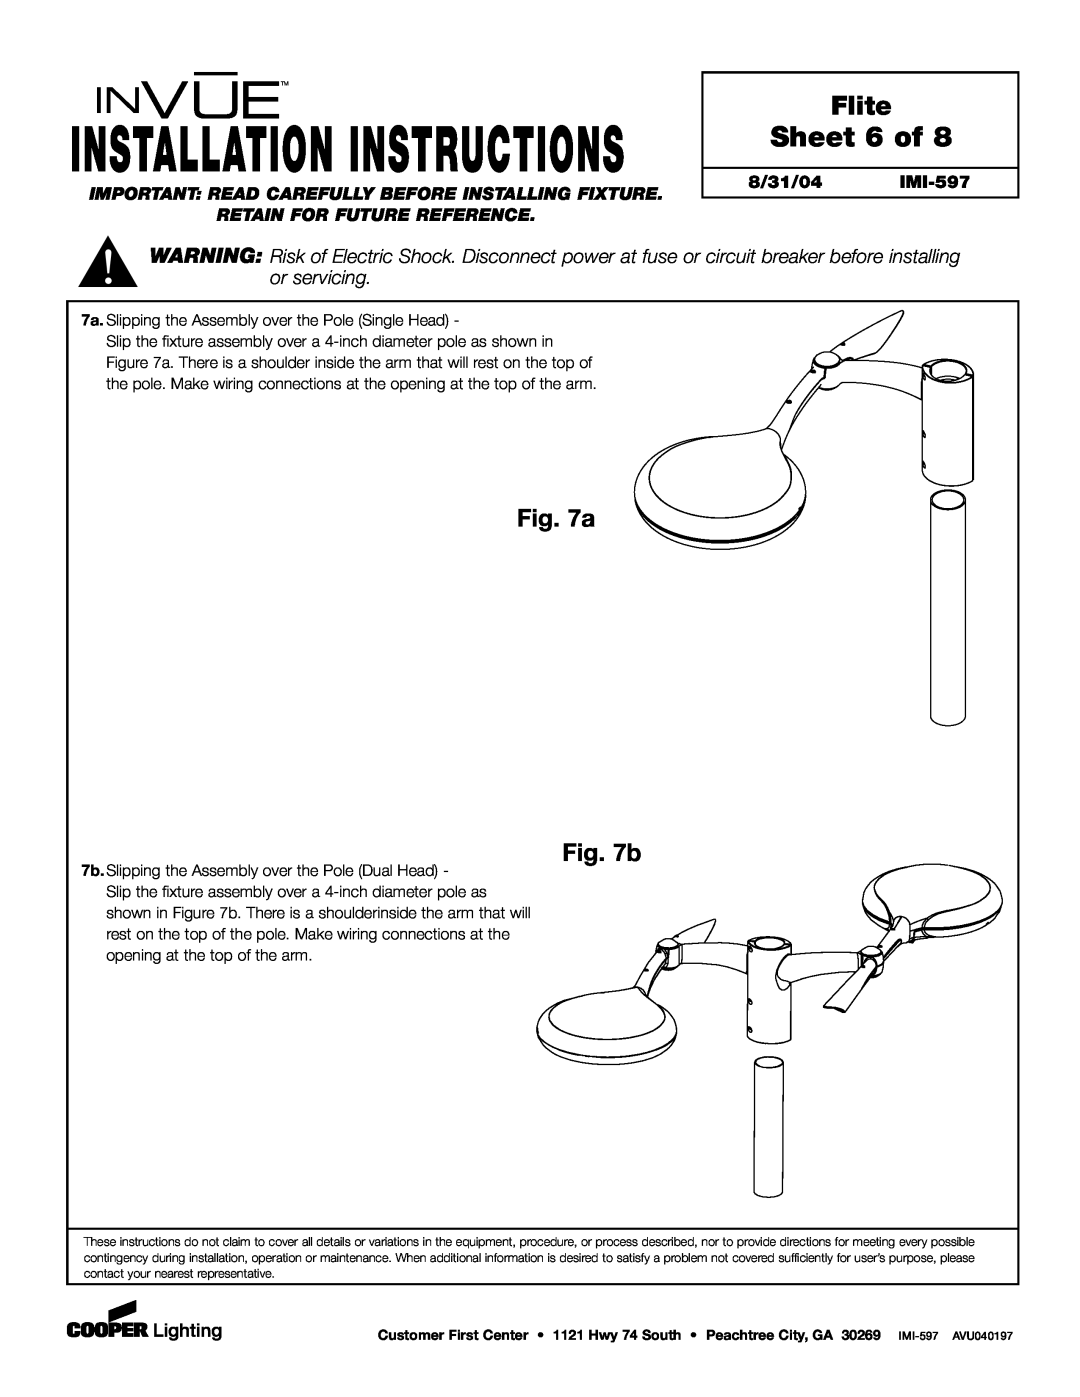 Cooper Lighting Sheet 6 of, a b, Installation Instructions, Flite, Retain For Future Reference, 8/31/04 IMI-597 